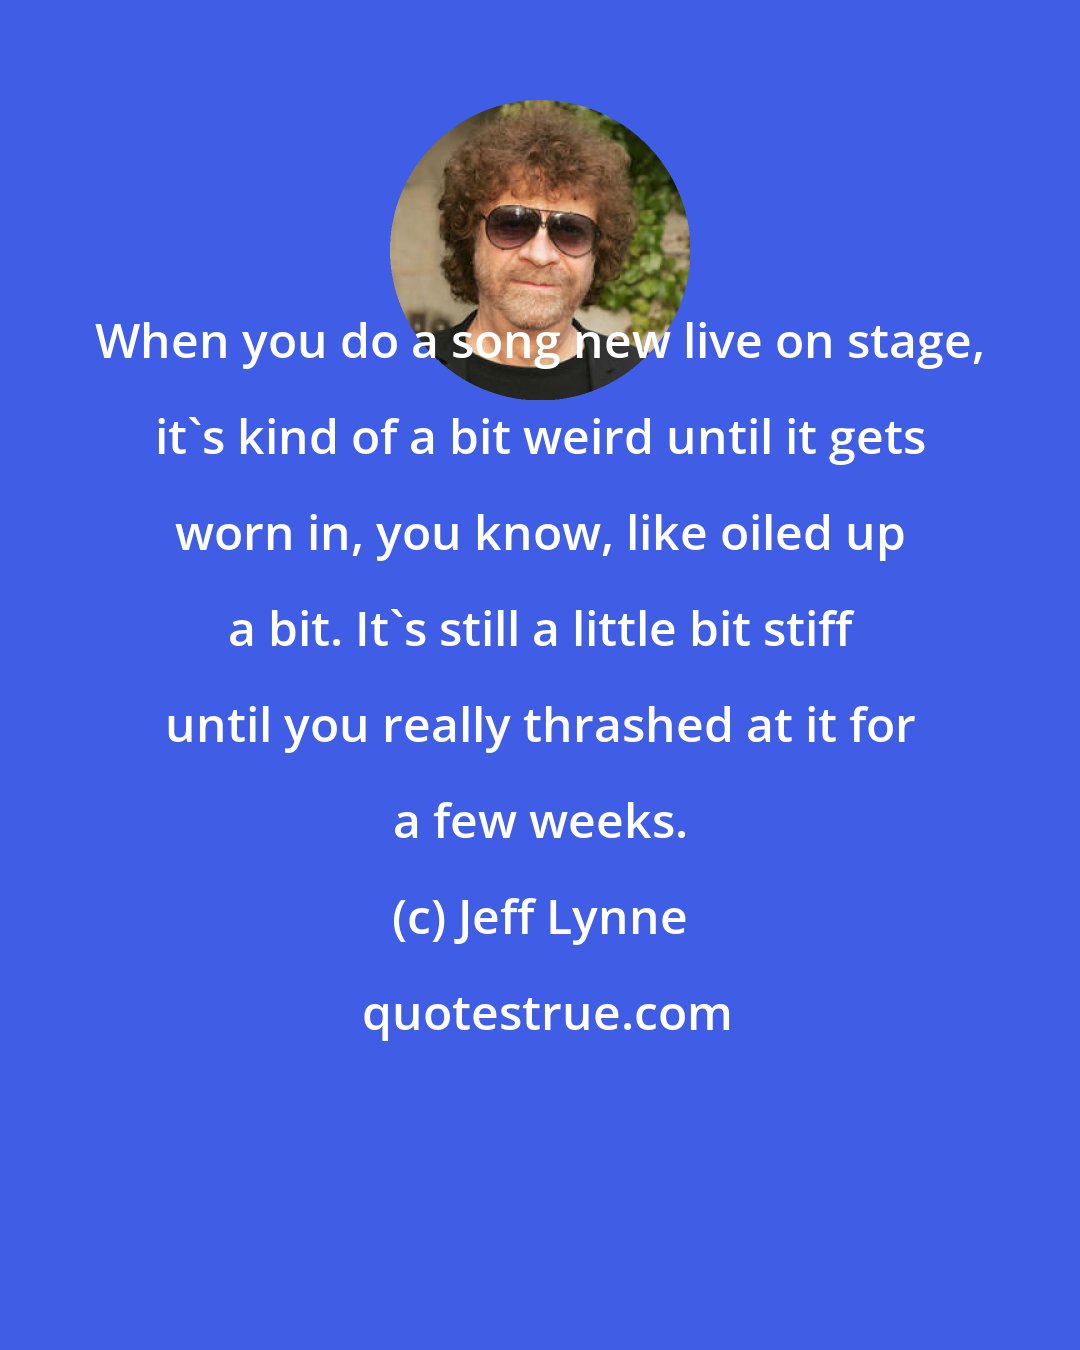 Jeff Lynne: When you do a song new live on stage, it's kind of a bit weird until it gets worn in, you know, like oiled up a bit. It's still a little bit stiff until you really thrashed at it for a few weeks.